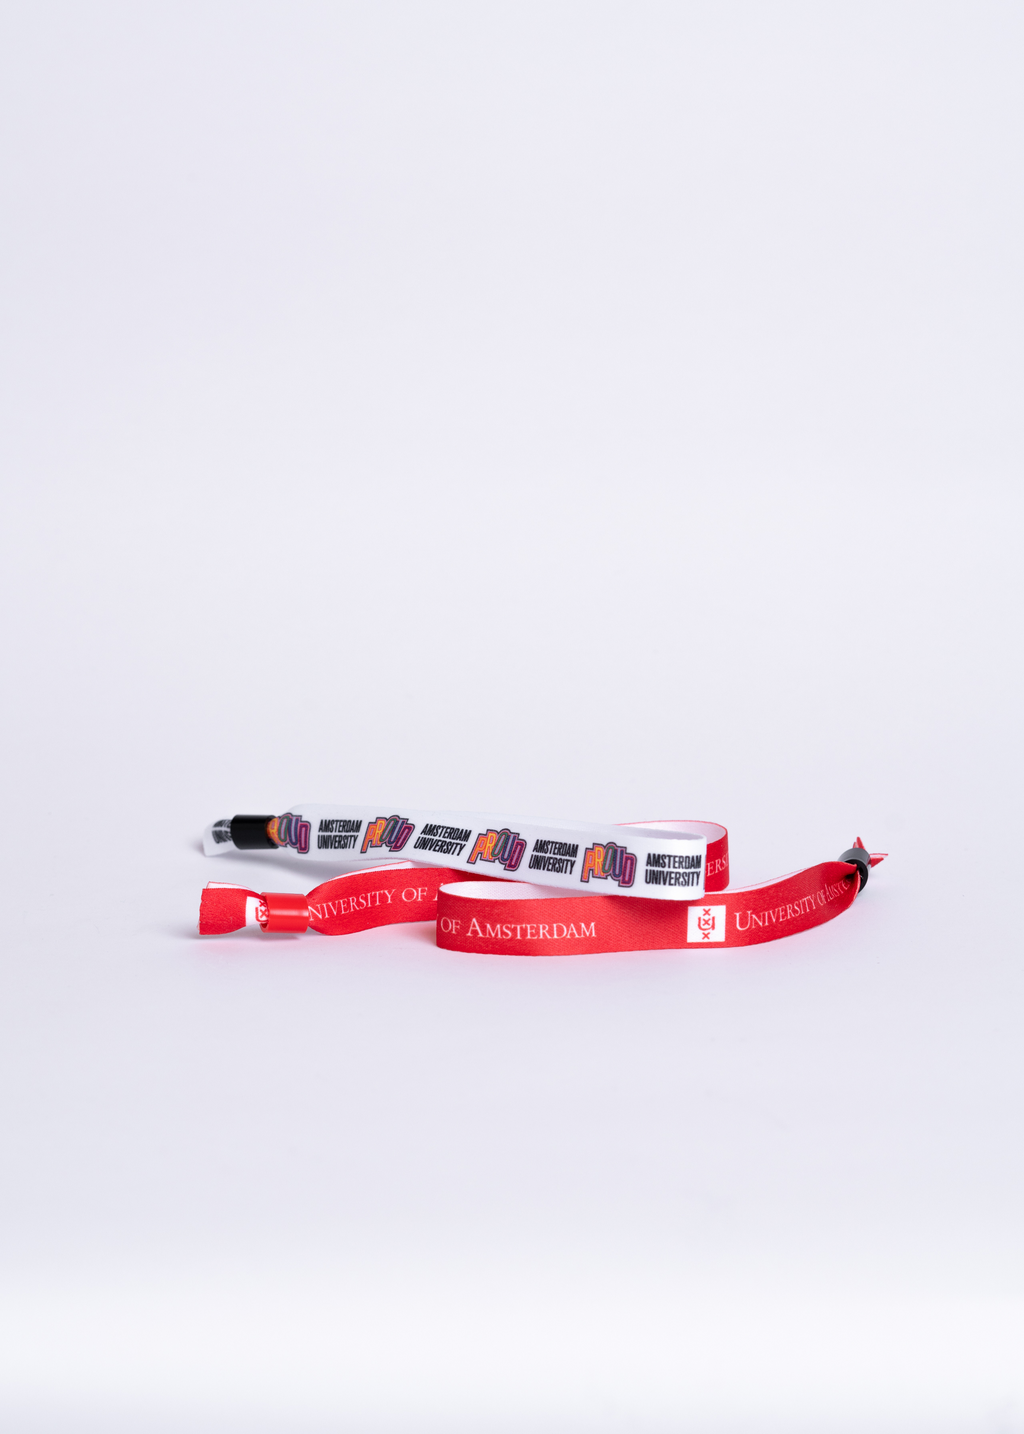 Wristbands with the University of Amsterdam and Proud logo